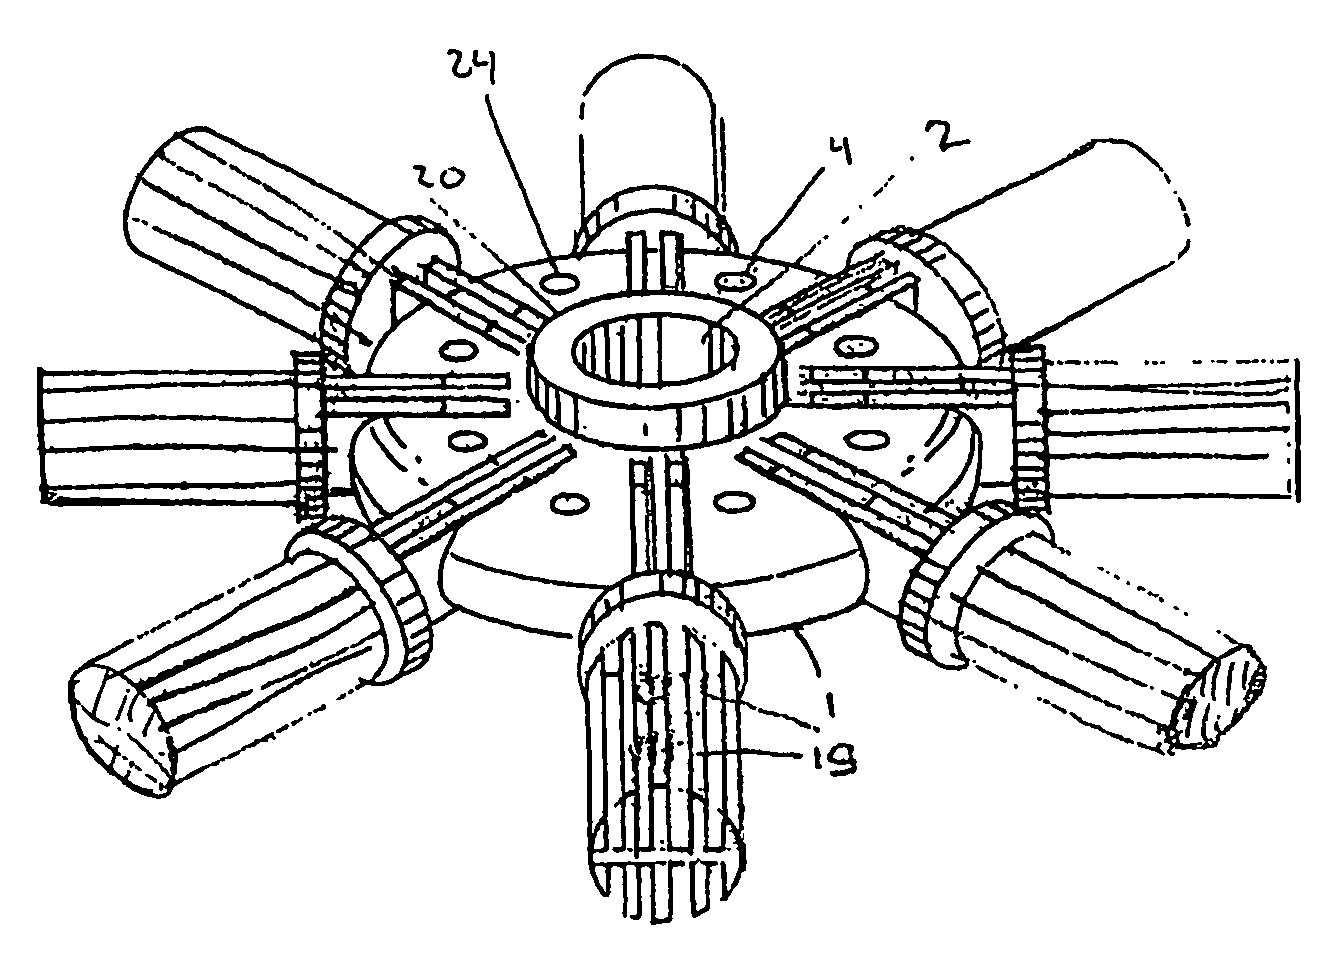 Double tang design articulating hub assembly